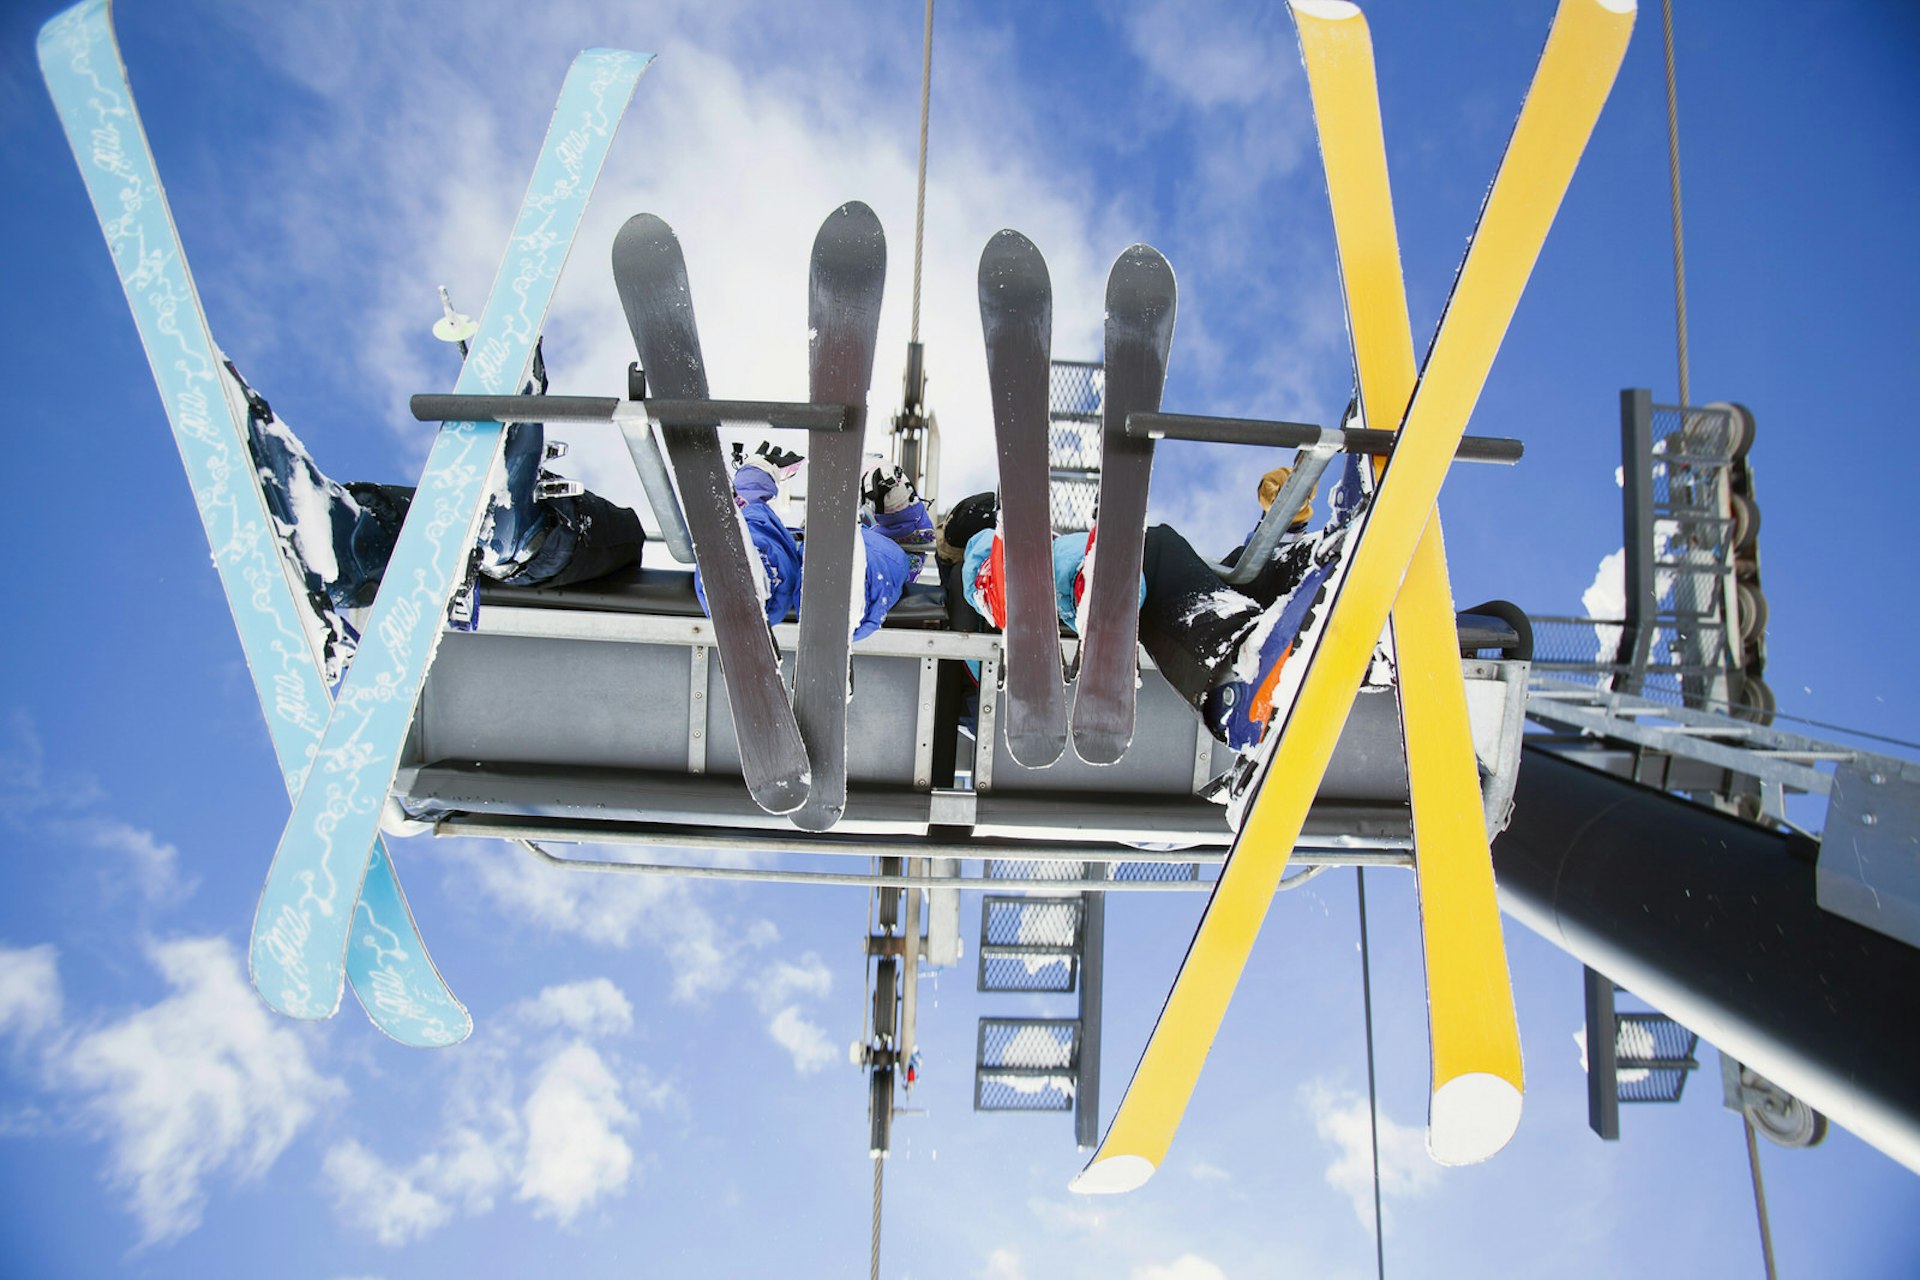 Looking up at a family of four in a ski lift chair, with two large sets of skis on the end representing parents and two small sets in between representing kids.